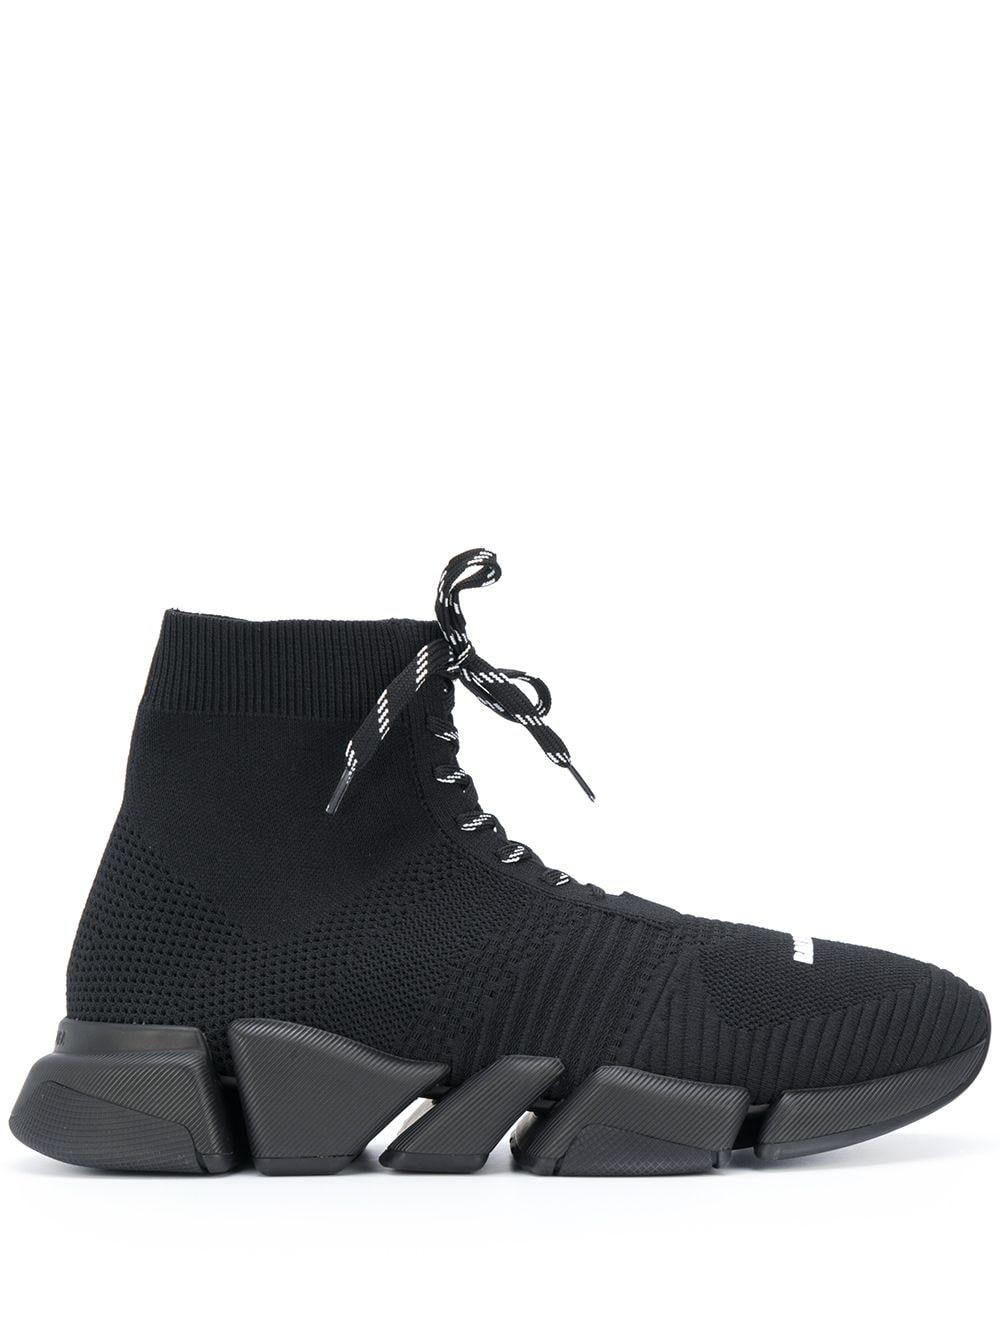 Balenciaga Speed Lace Trainers in Black for Men - Save 38% - Lyst